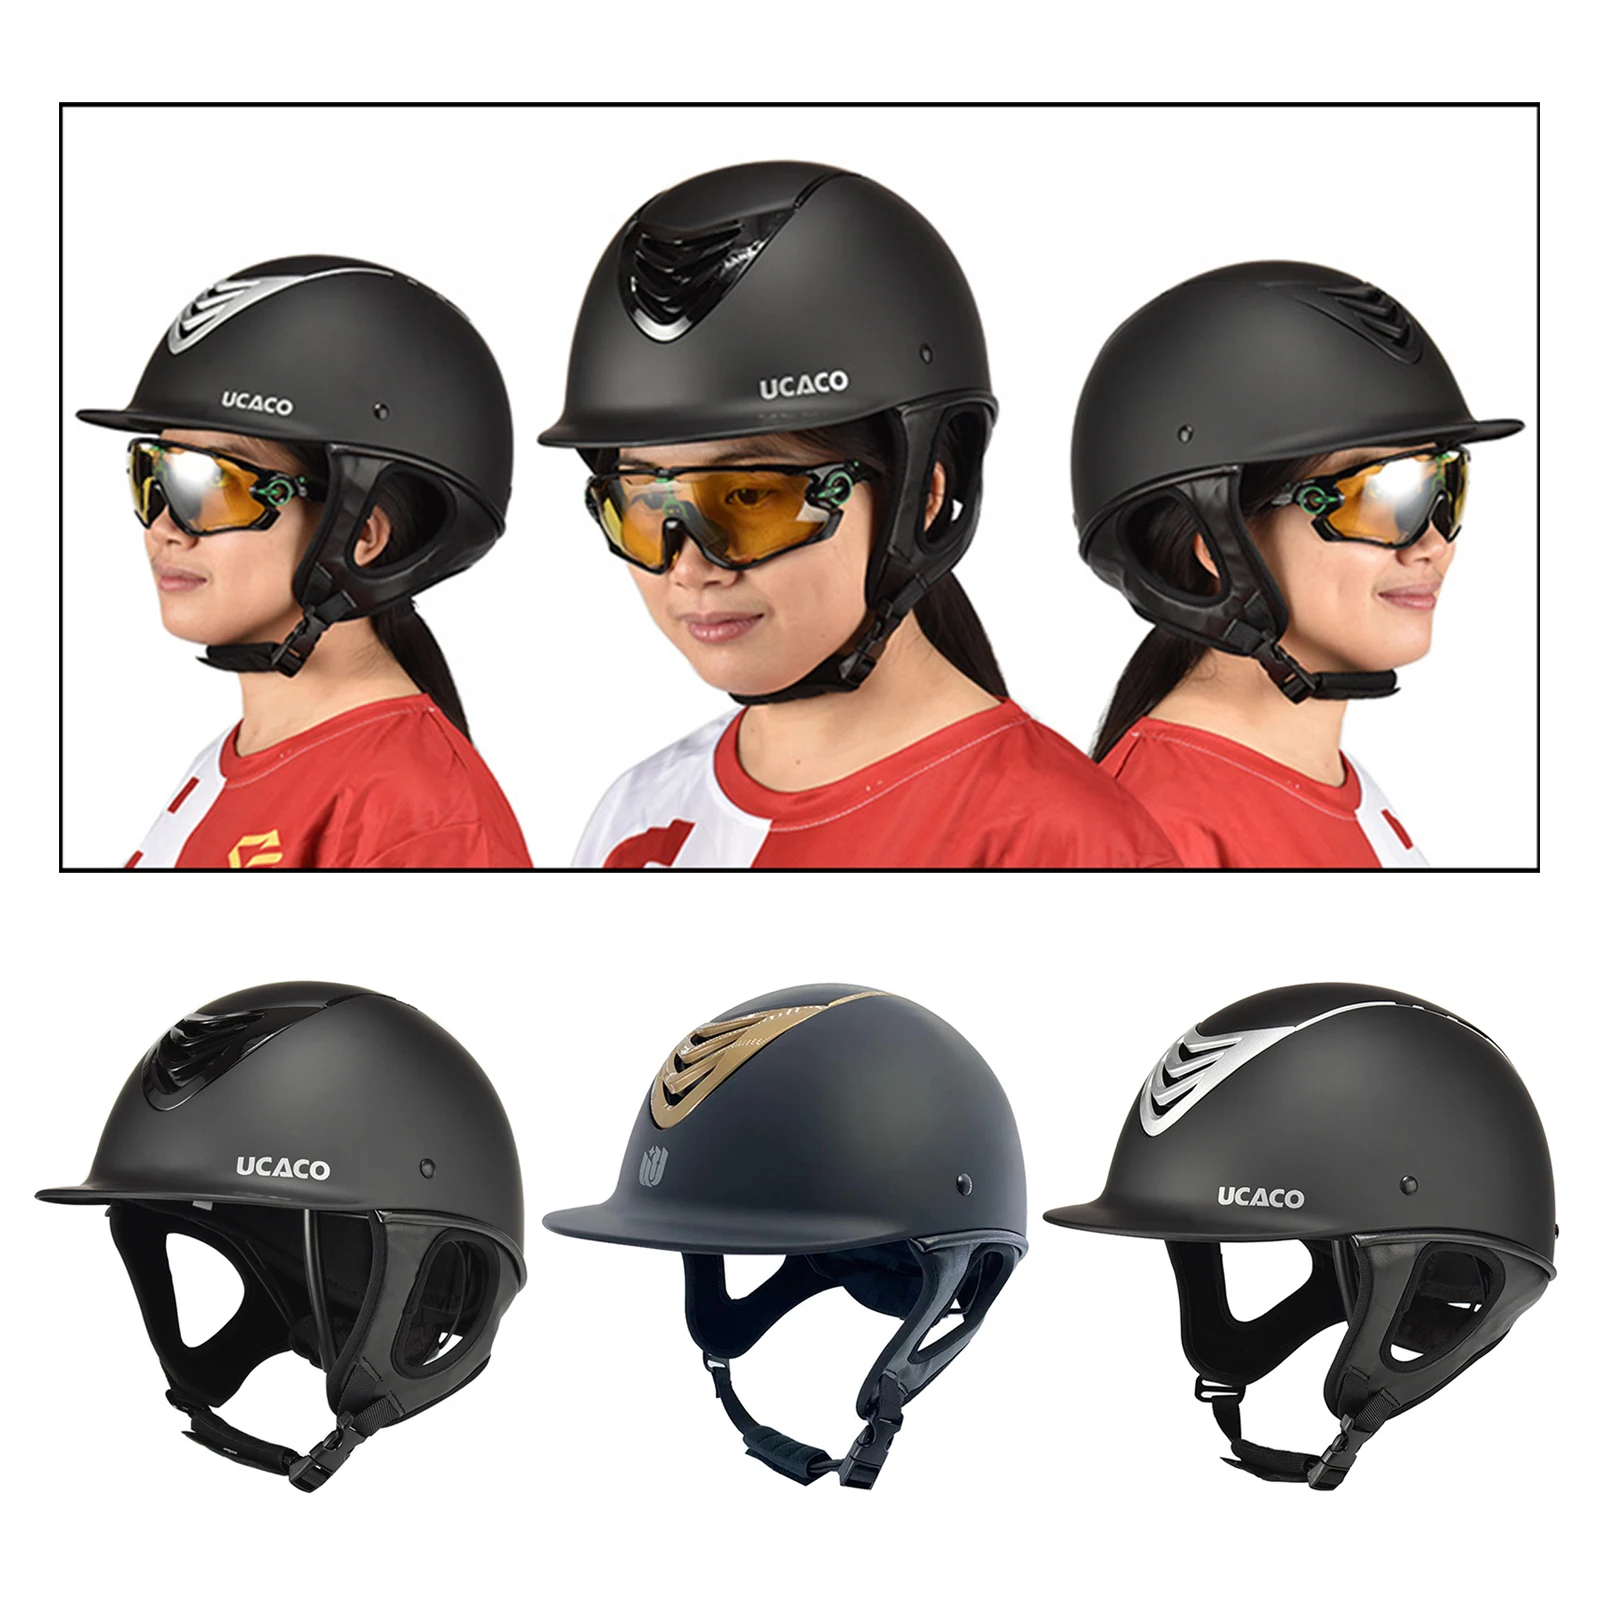 unisex-adults-kids-horse-riding-helmet-equestrian-helmet-adjustable-horse-riding-hat-horse-protective-head-gear-for-horse-riding